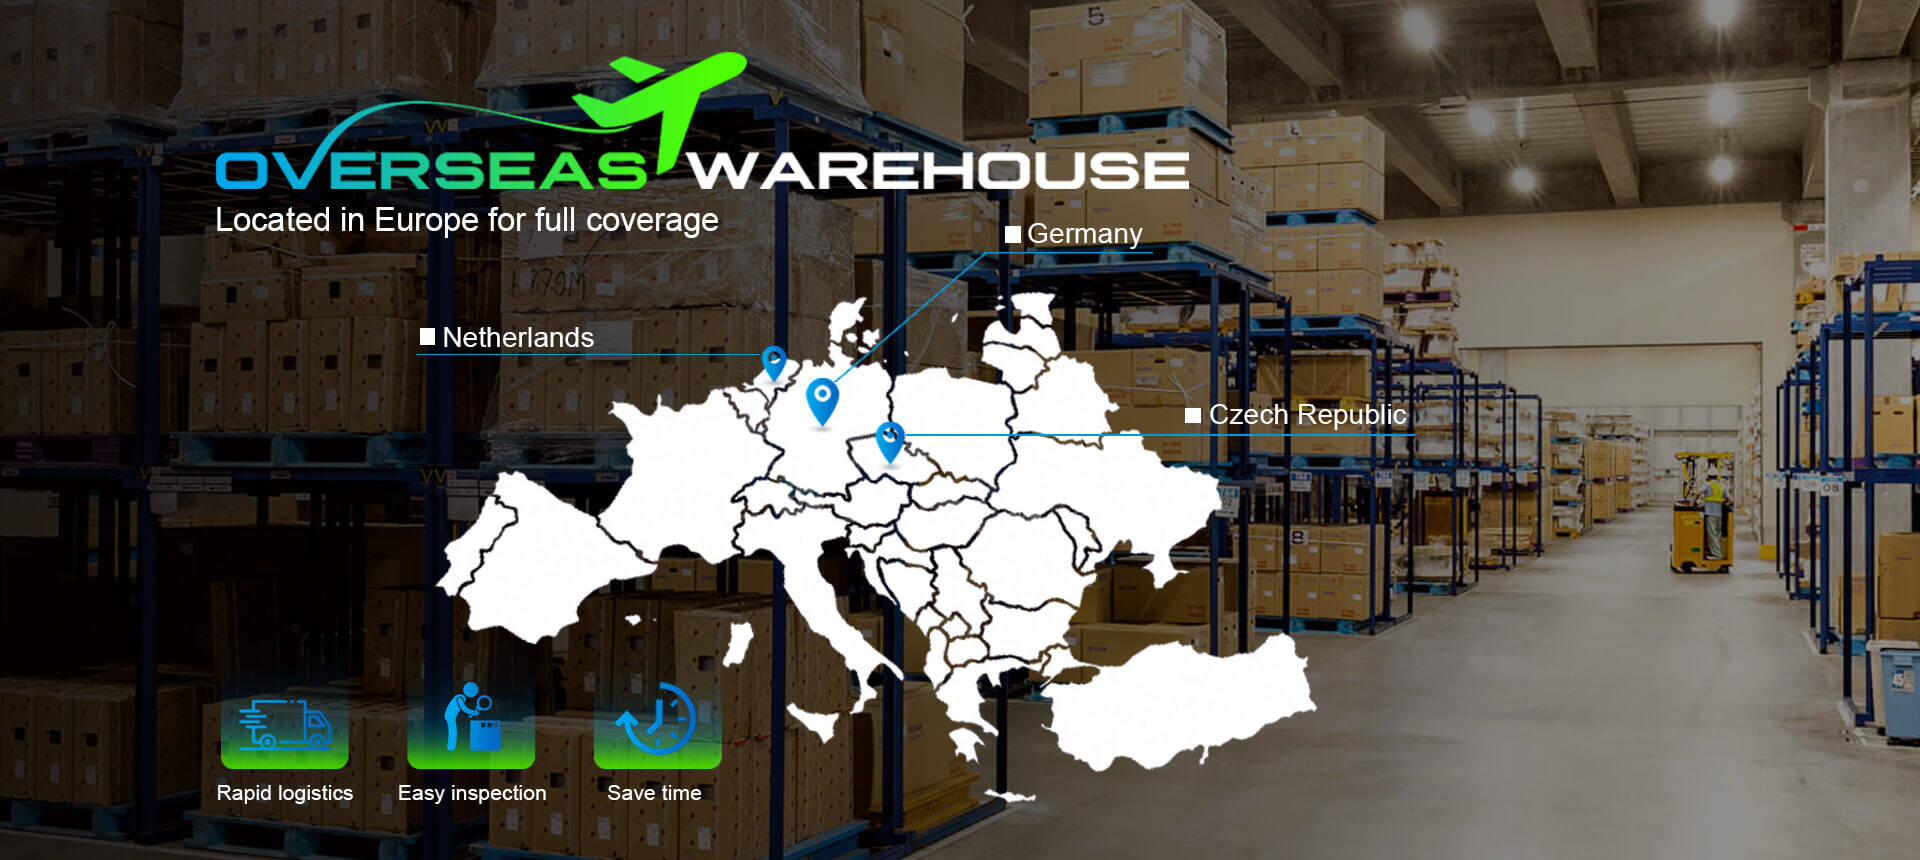 Overseas warehouse lithium battery suppliers